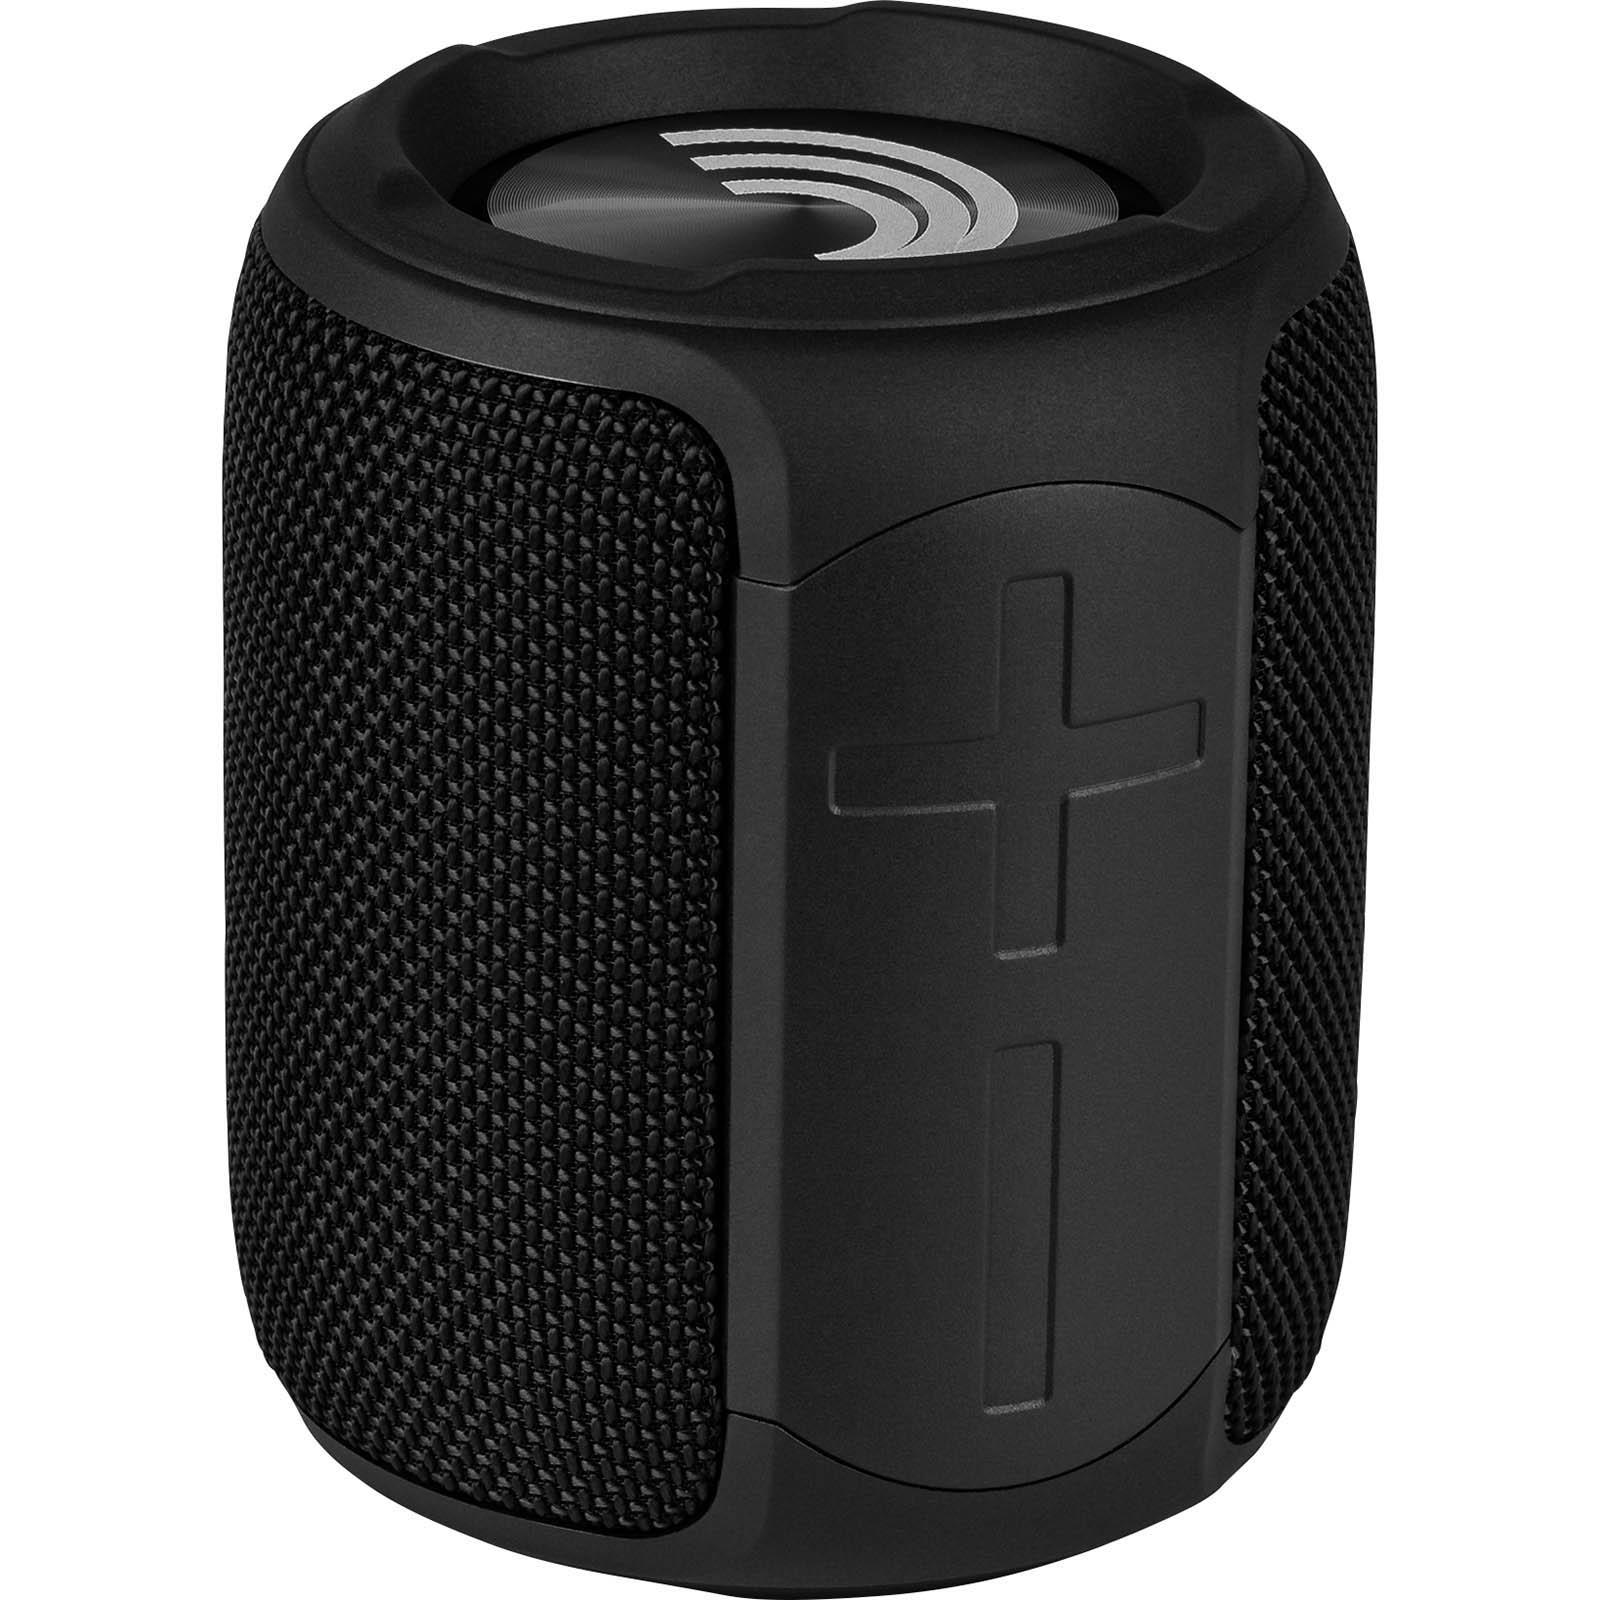 Why are These $99.00 Speakers So Popular? Bose Companion 2 Series